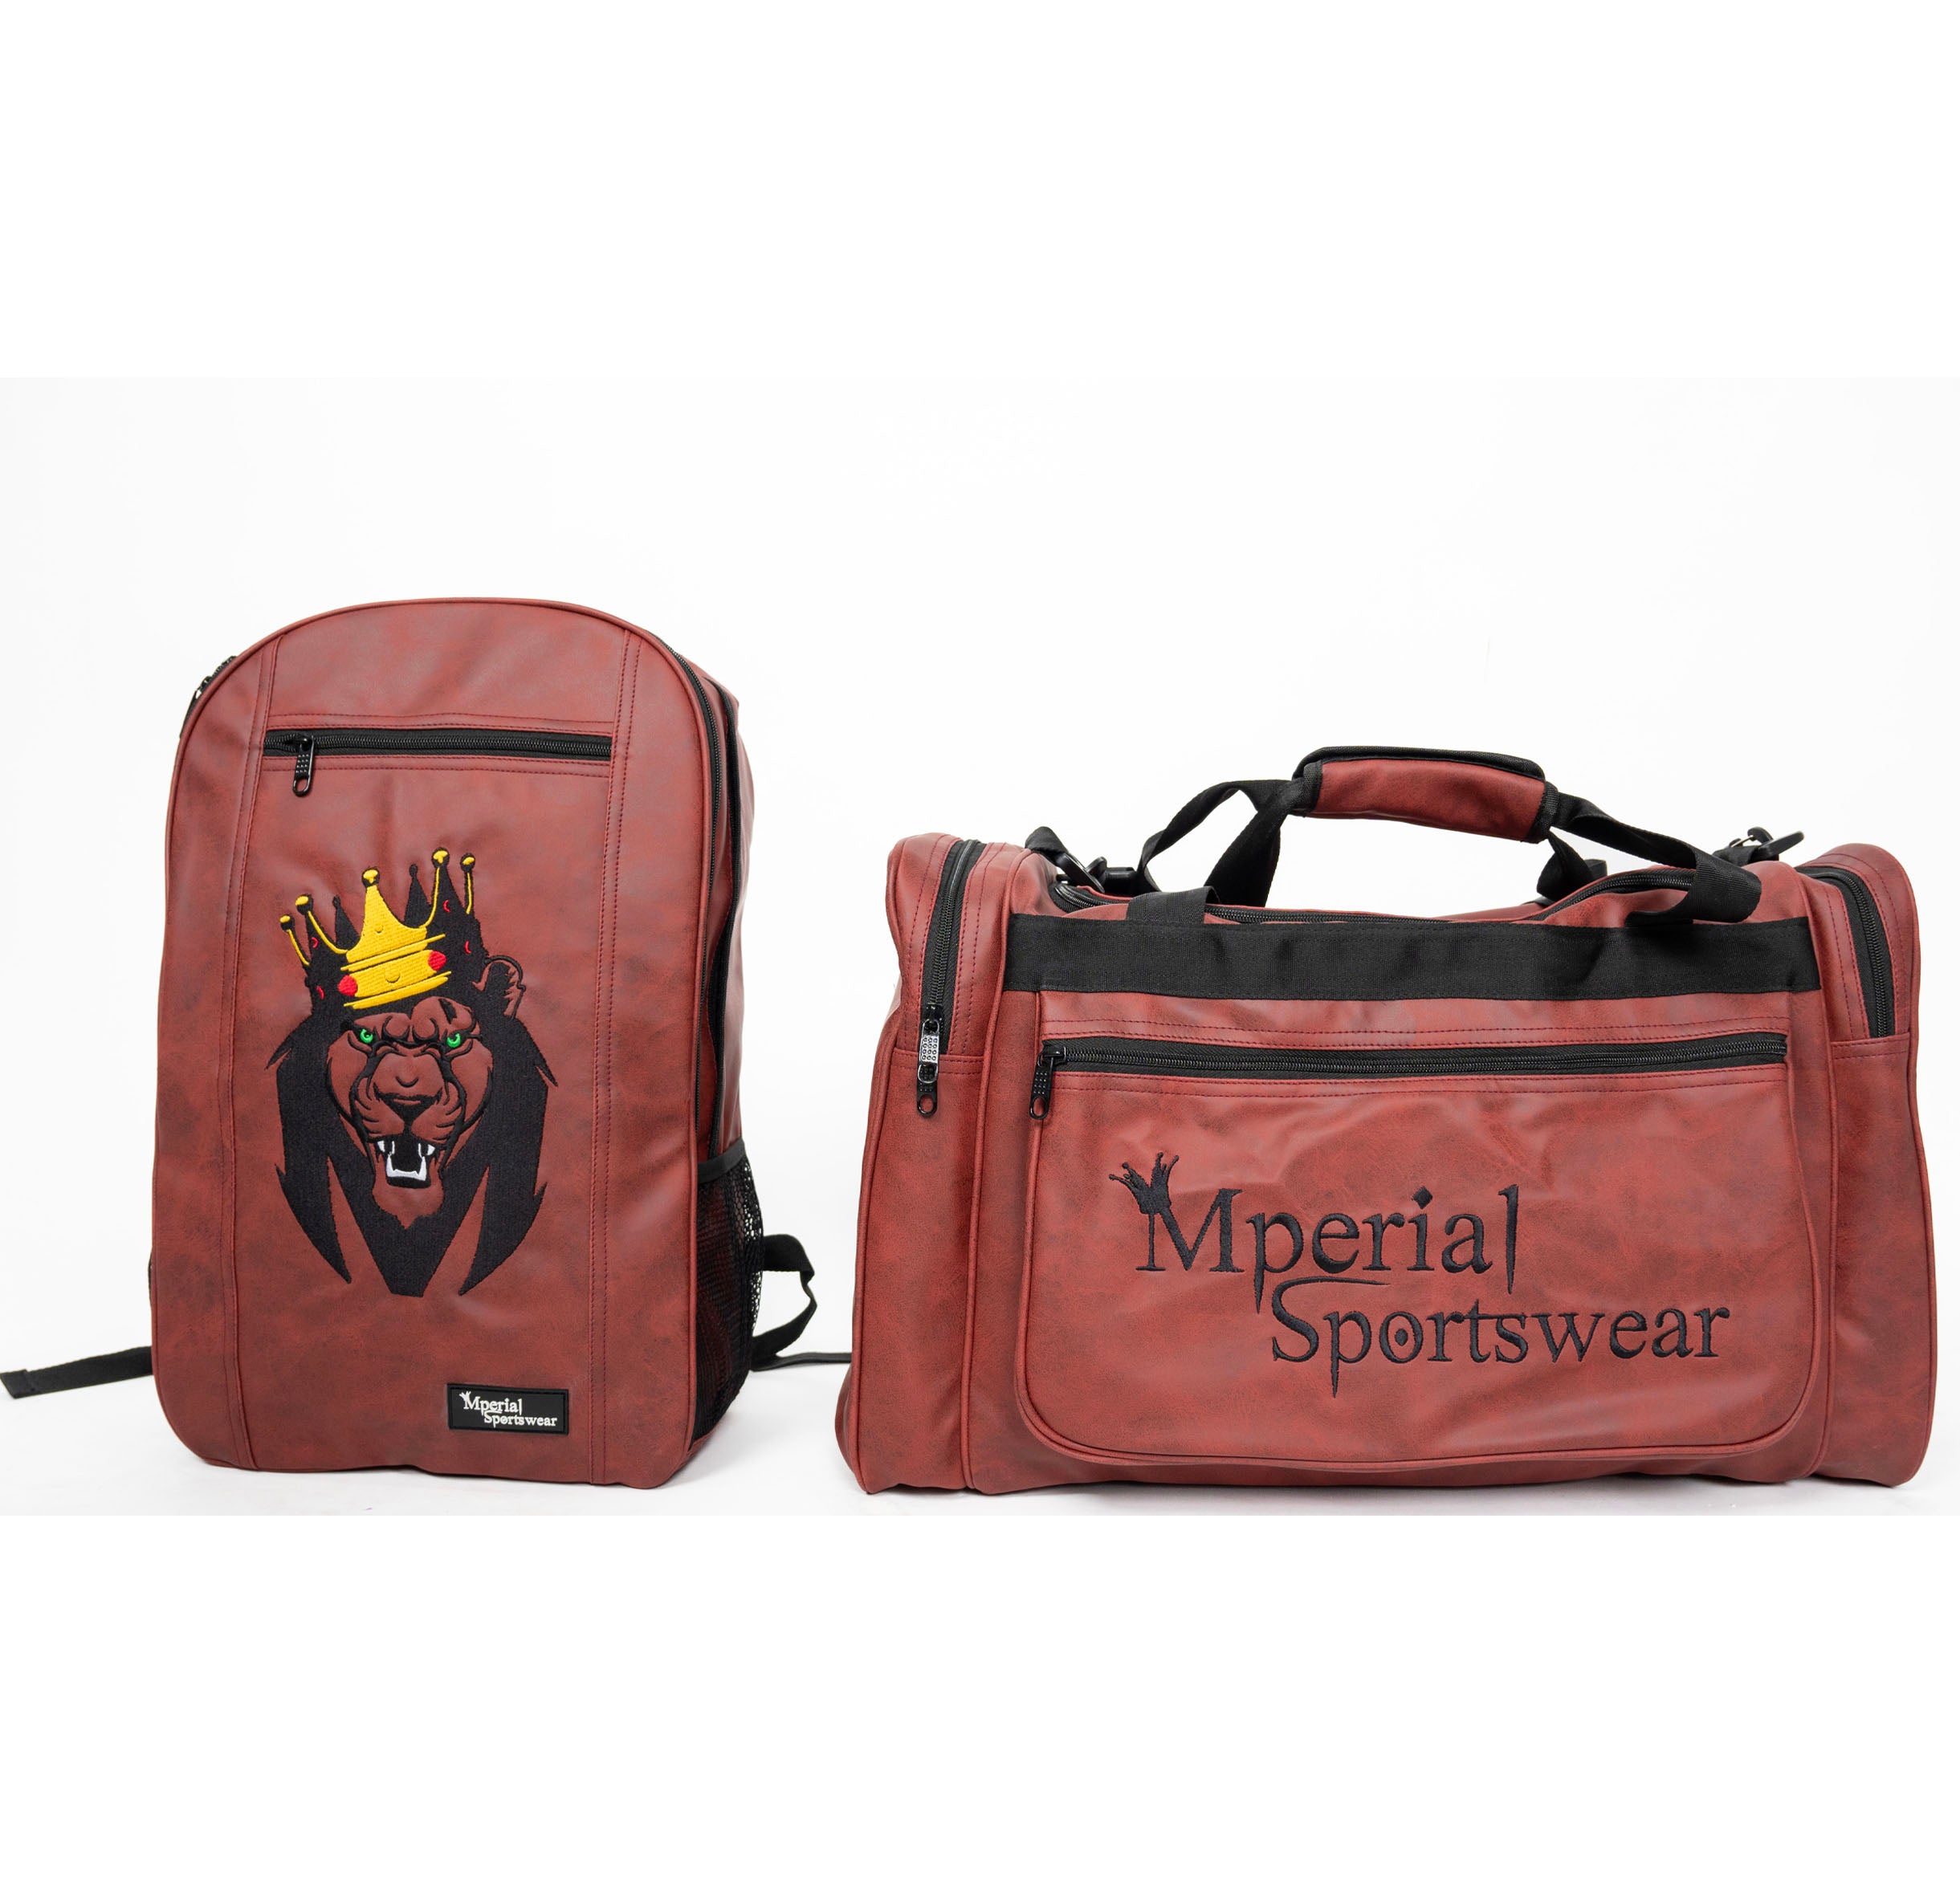 Mperial Maroon Leather Backpack & Duffle Bag (Carry-on size)